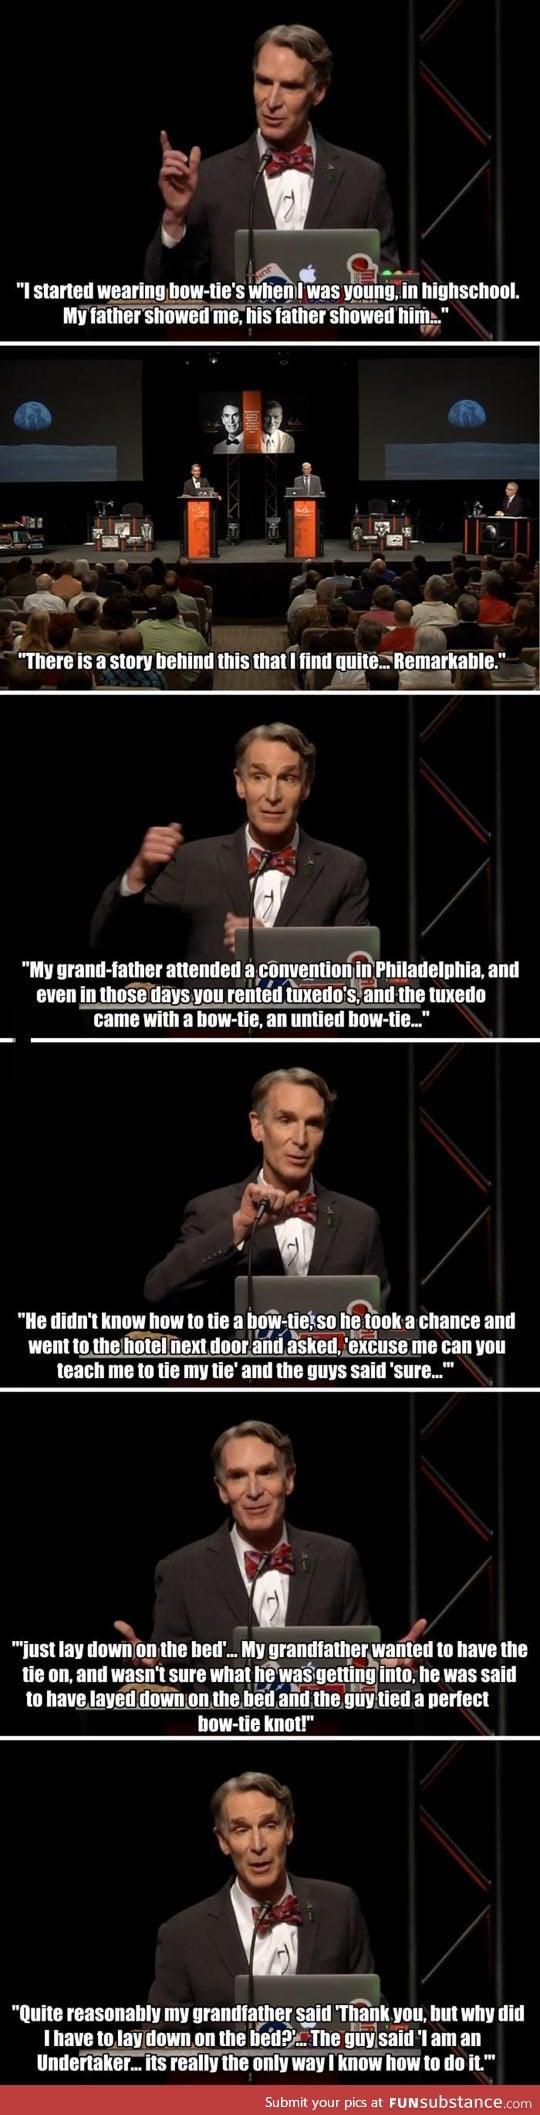 The Story Behind Bill Nye's Bow Tie